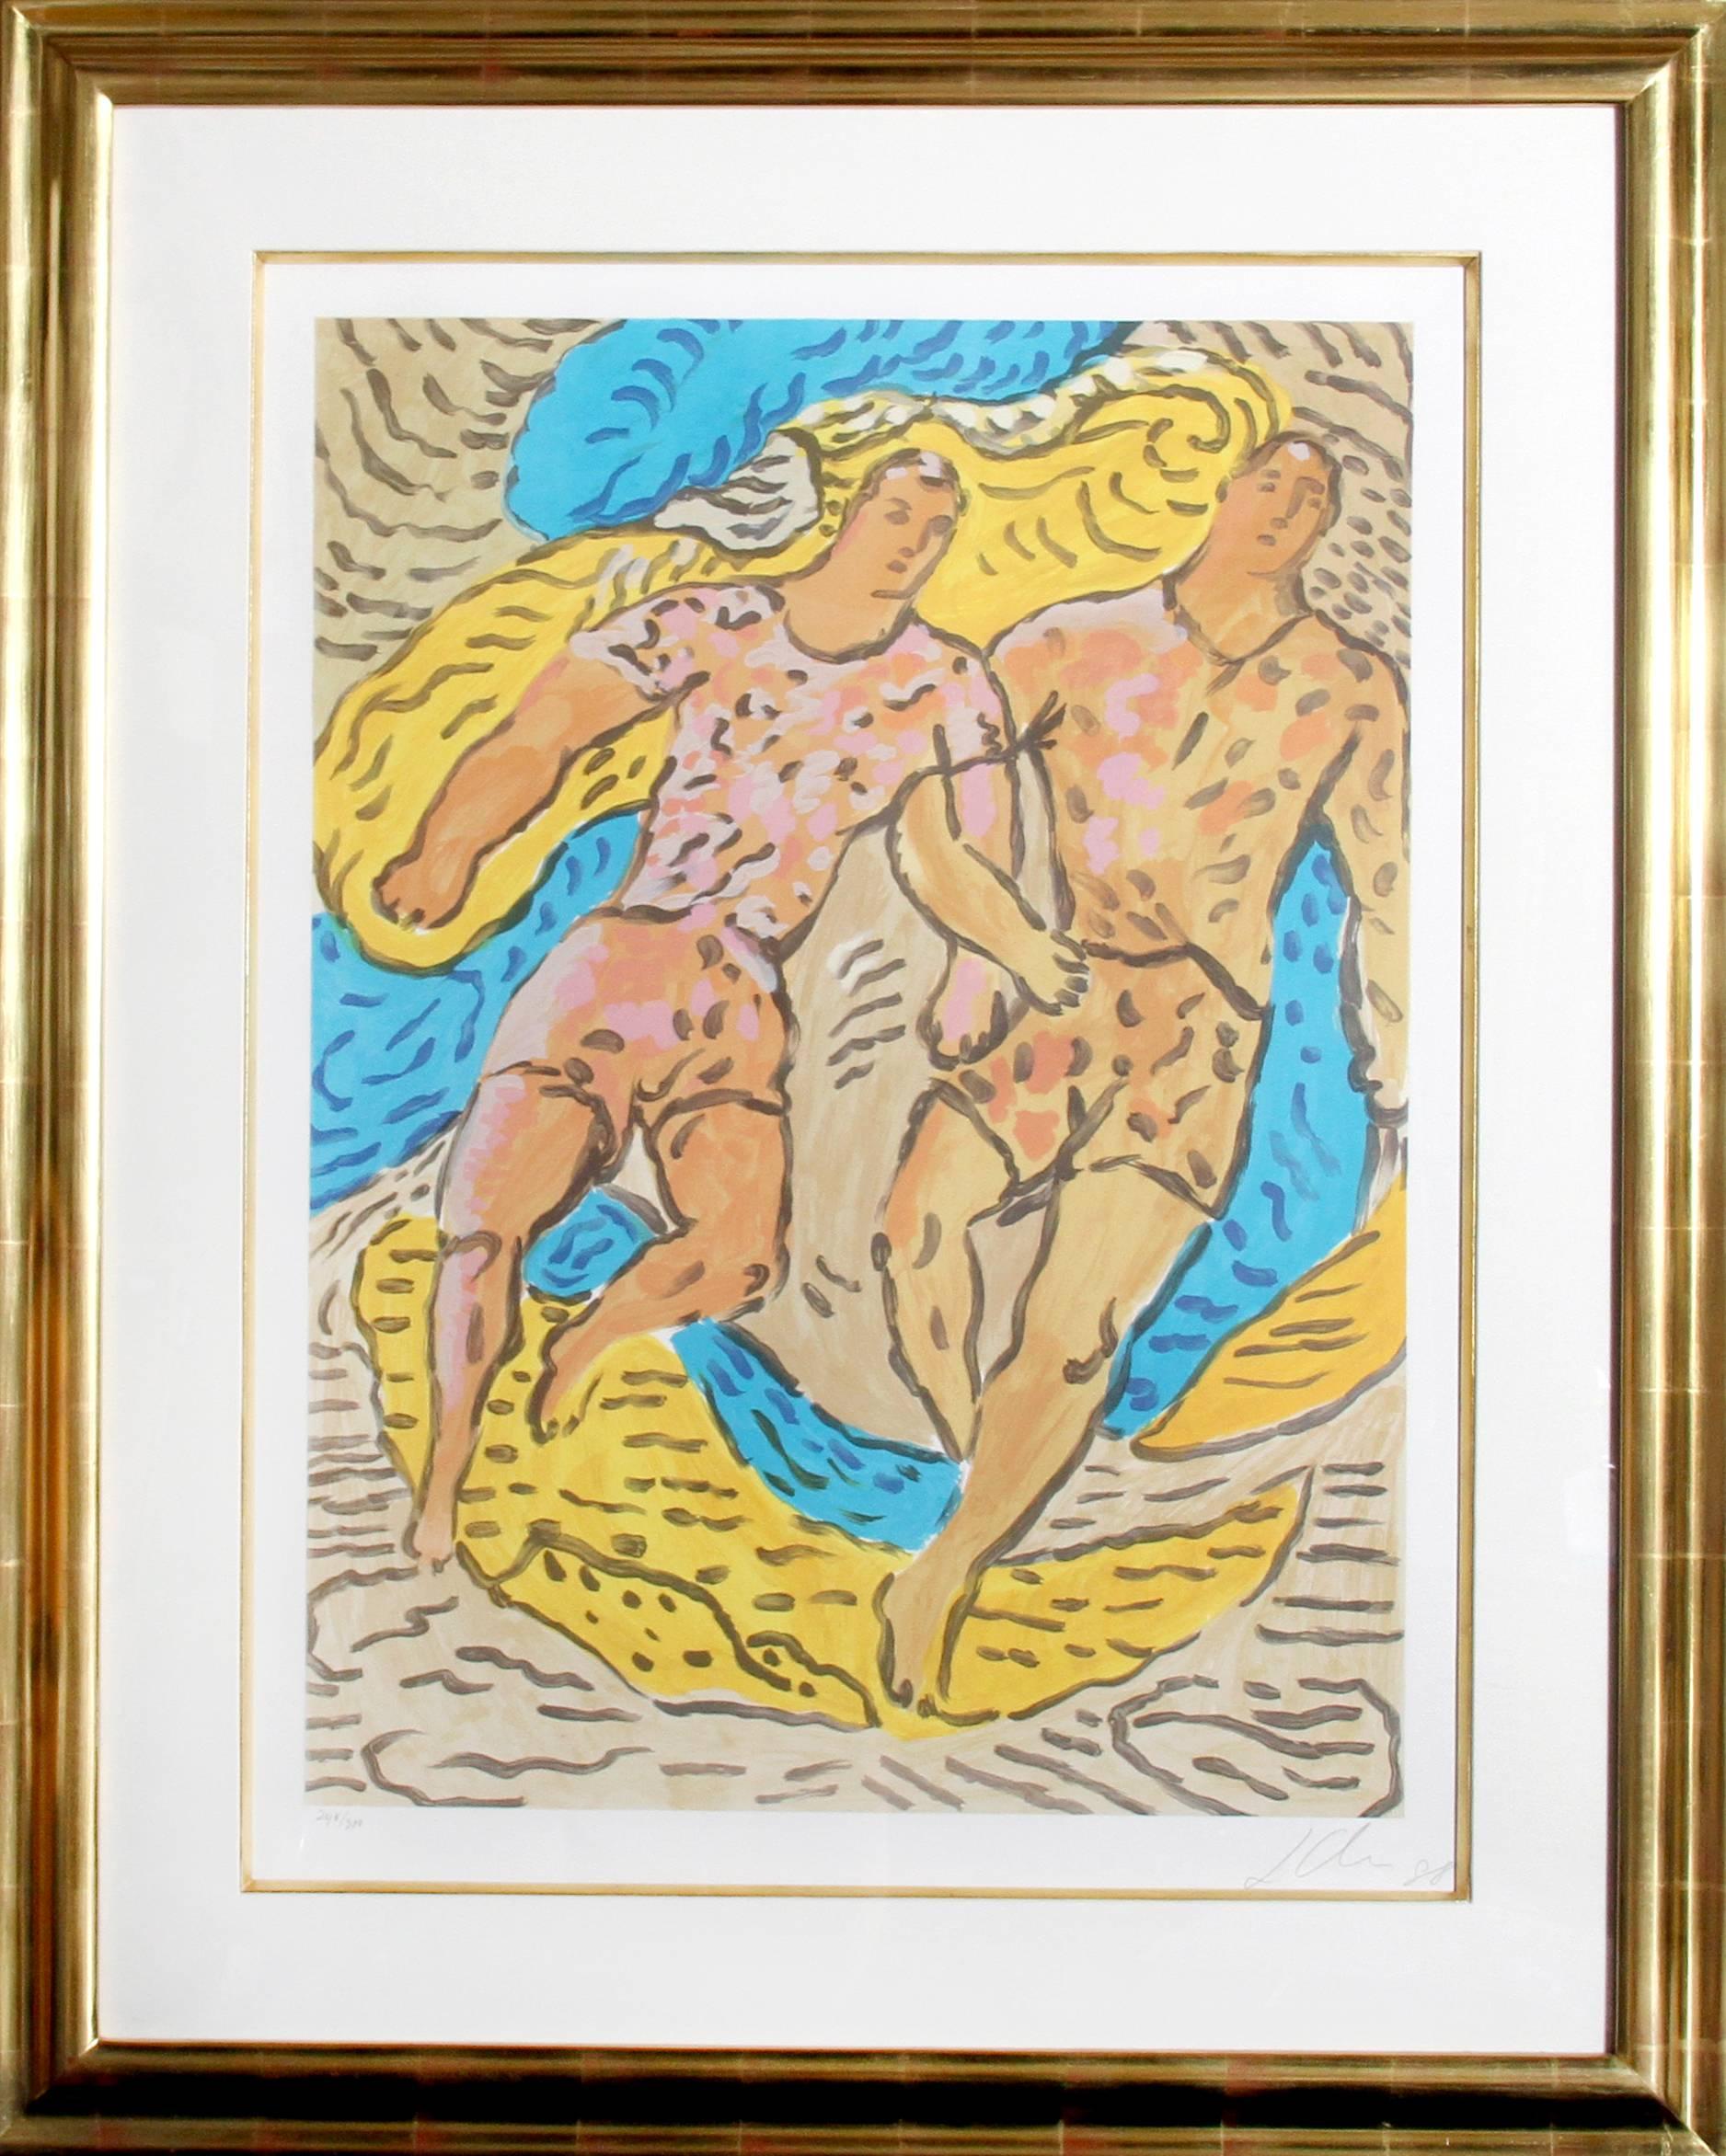 Artist: Sandro Chia, Italian (1946 - )
Title: Athletes
Year: 1988
Medium: Lithograph, signed and numbered in pencil
Edition: 300
Image Size: 29.5 x 21.5 inches 
Paper Size: 34 in. x 26 in. (86.36 cm x 66.04 cm)
Frame Size: 44 x 35 inches

